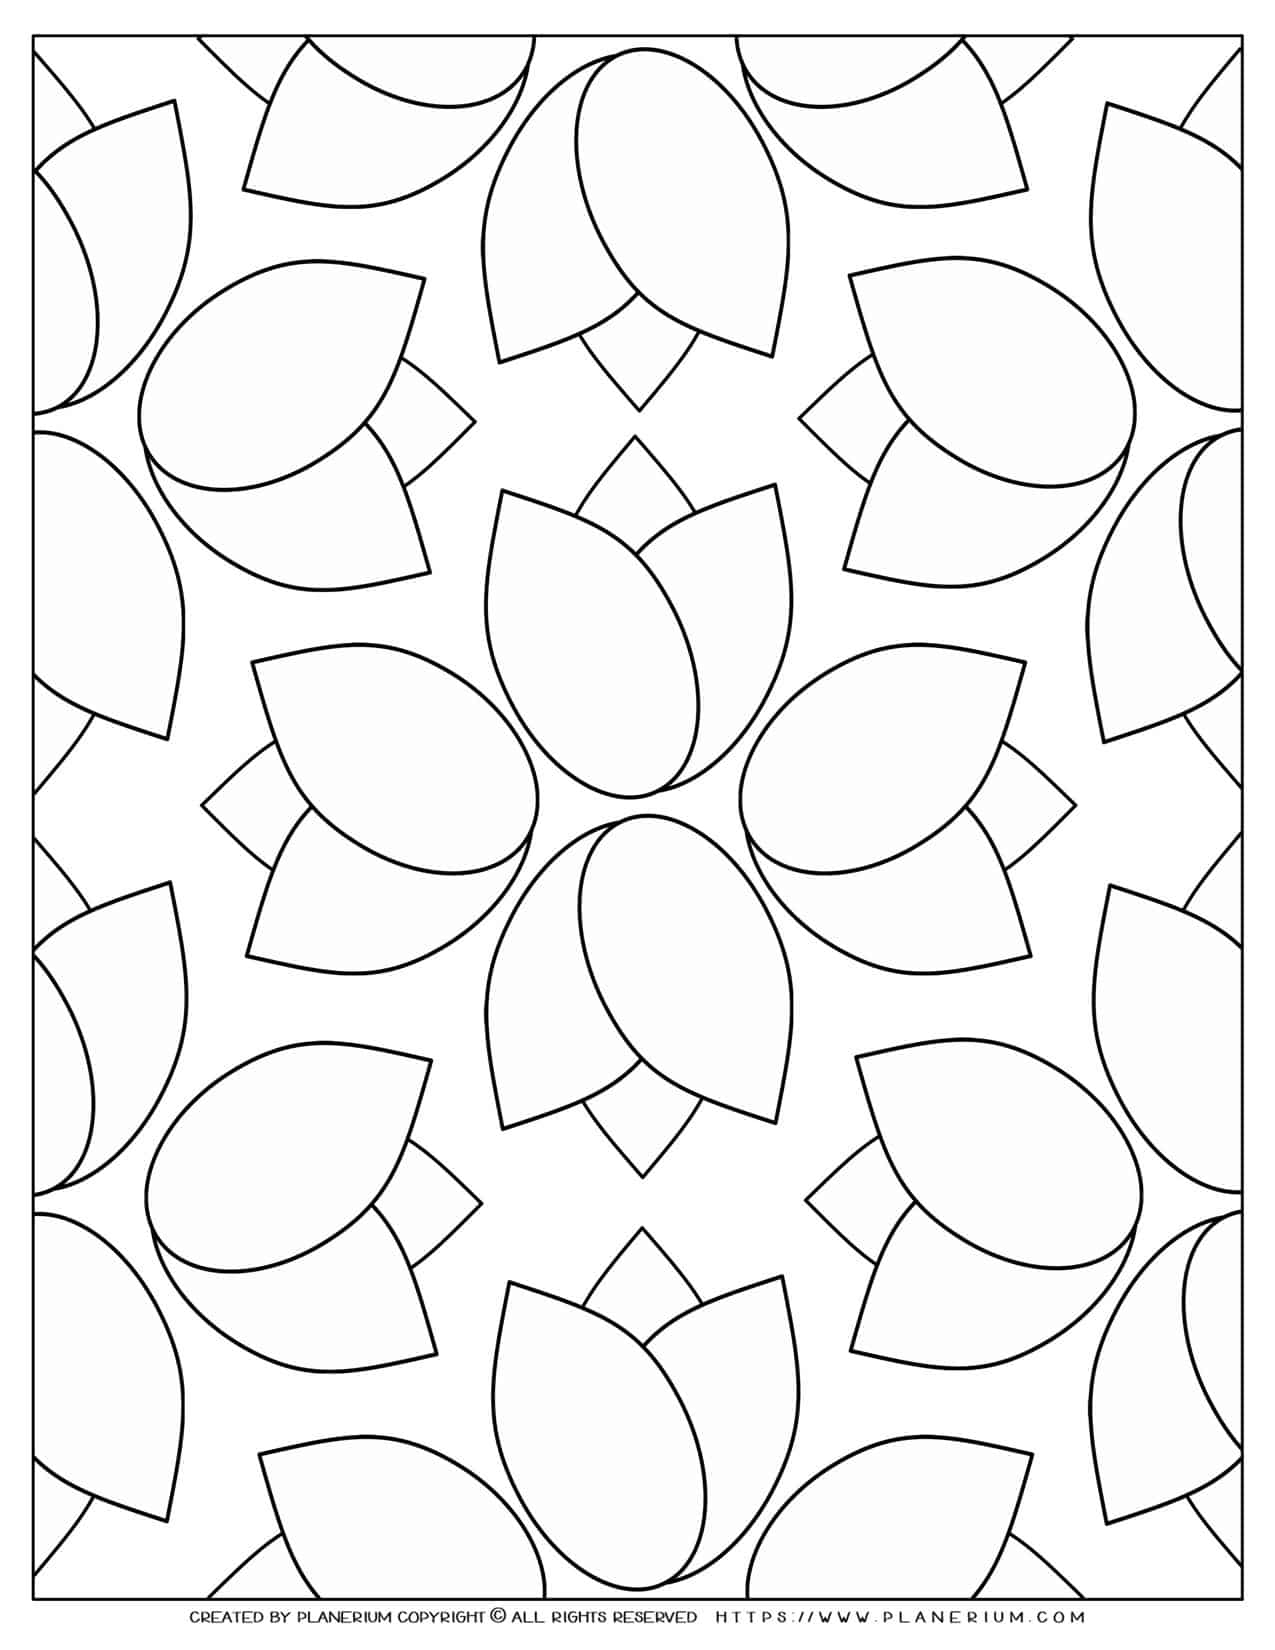 Pattern coloring page tulip flower free printable